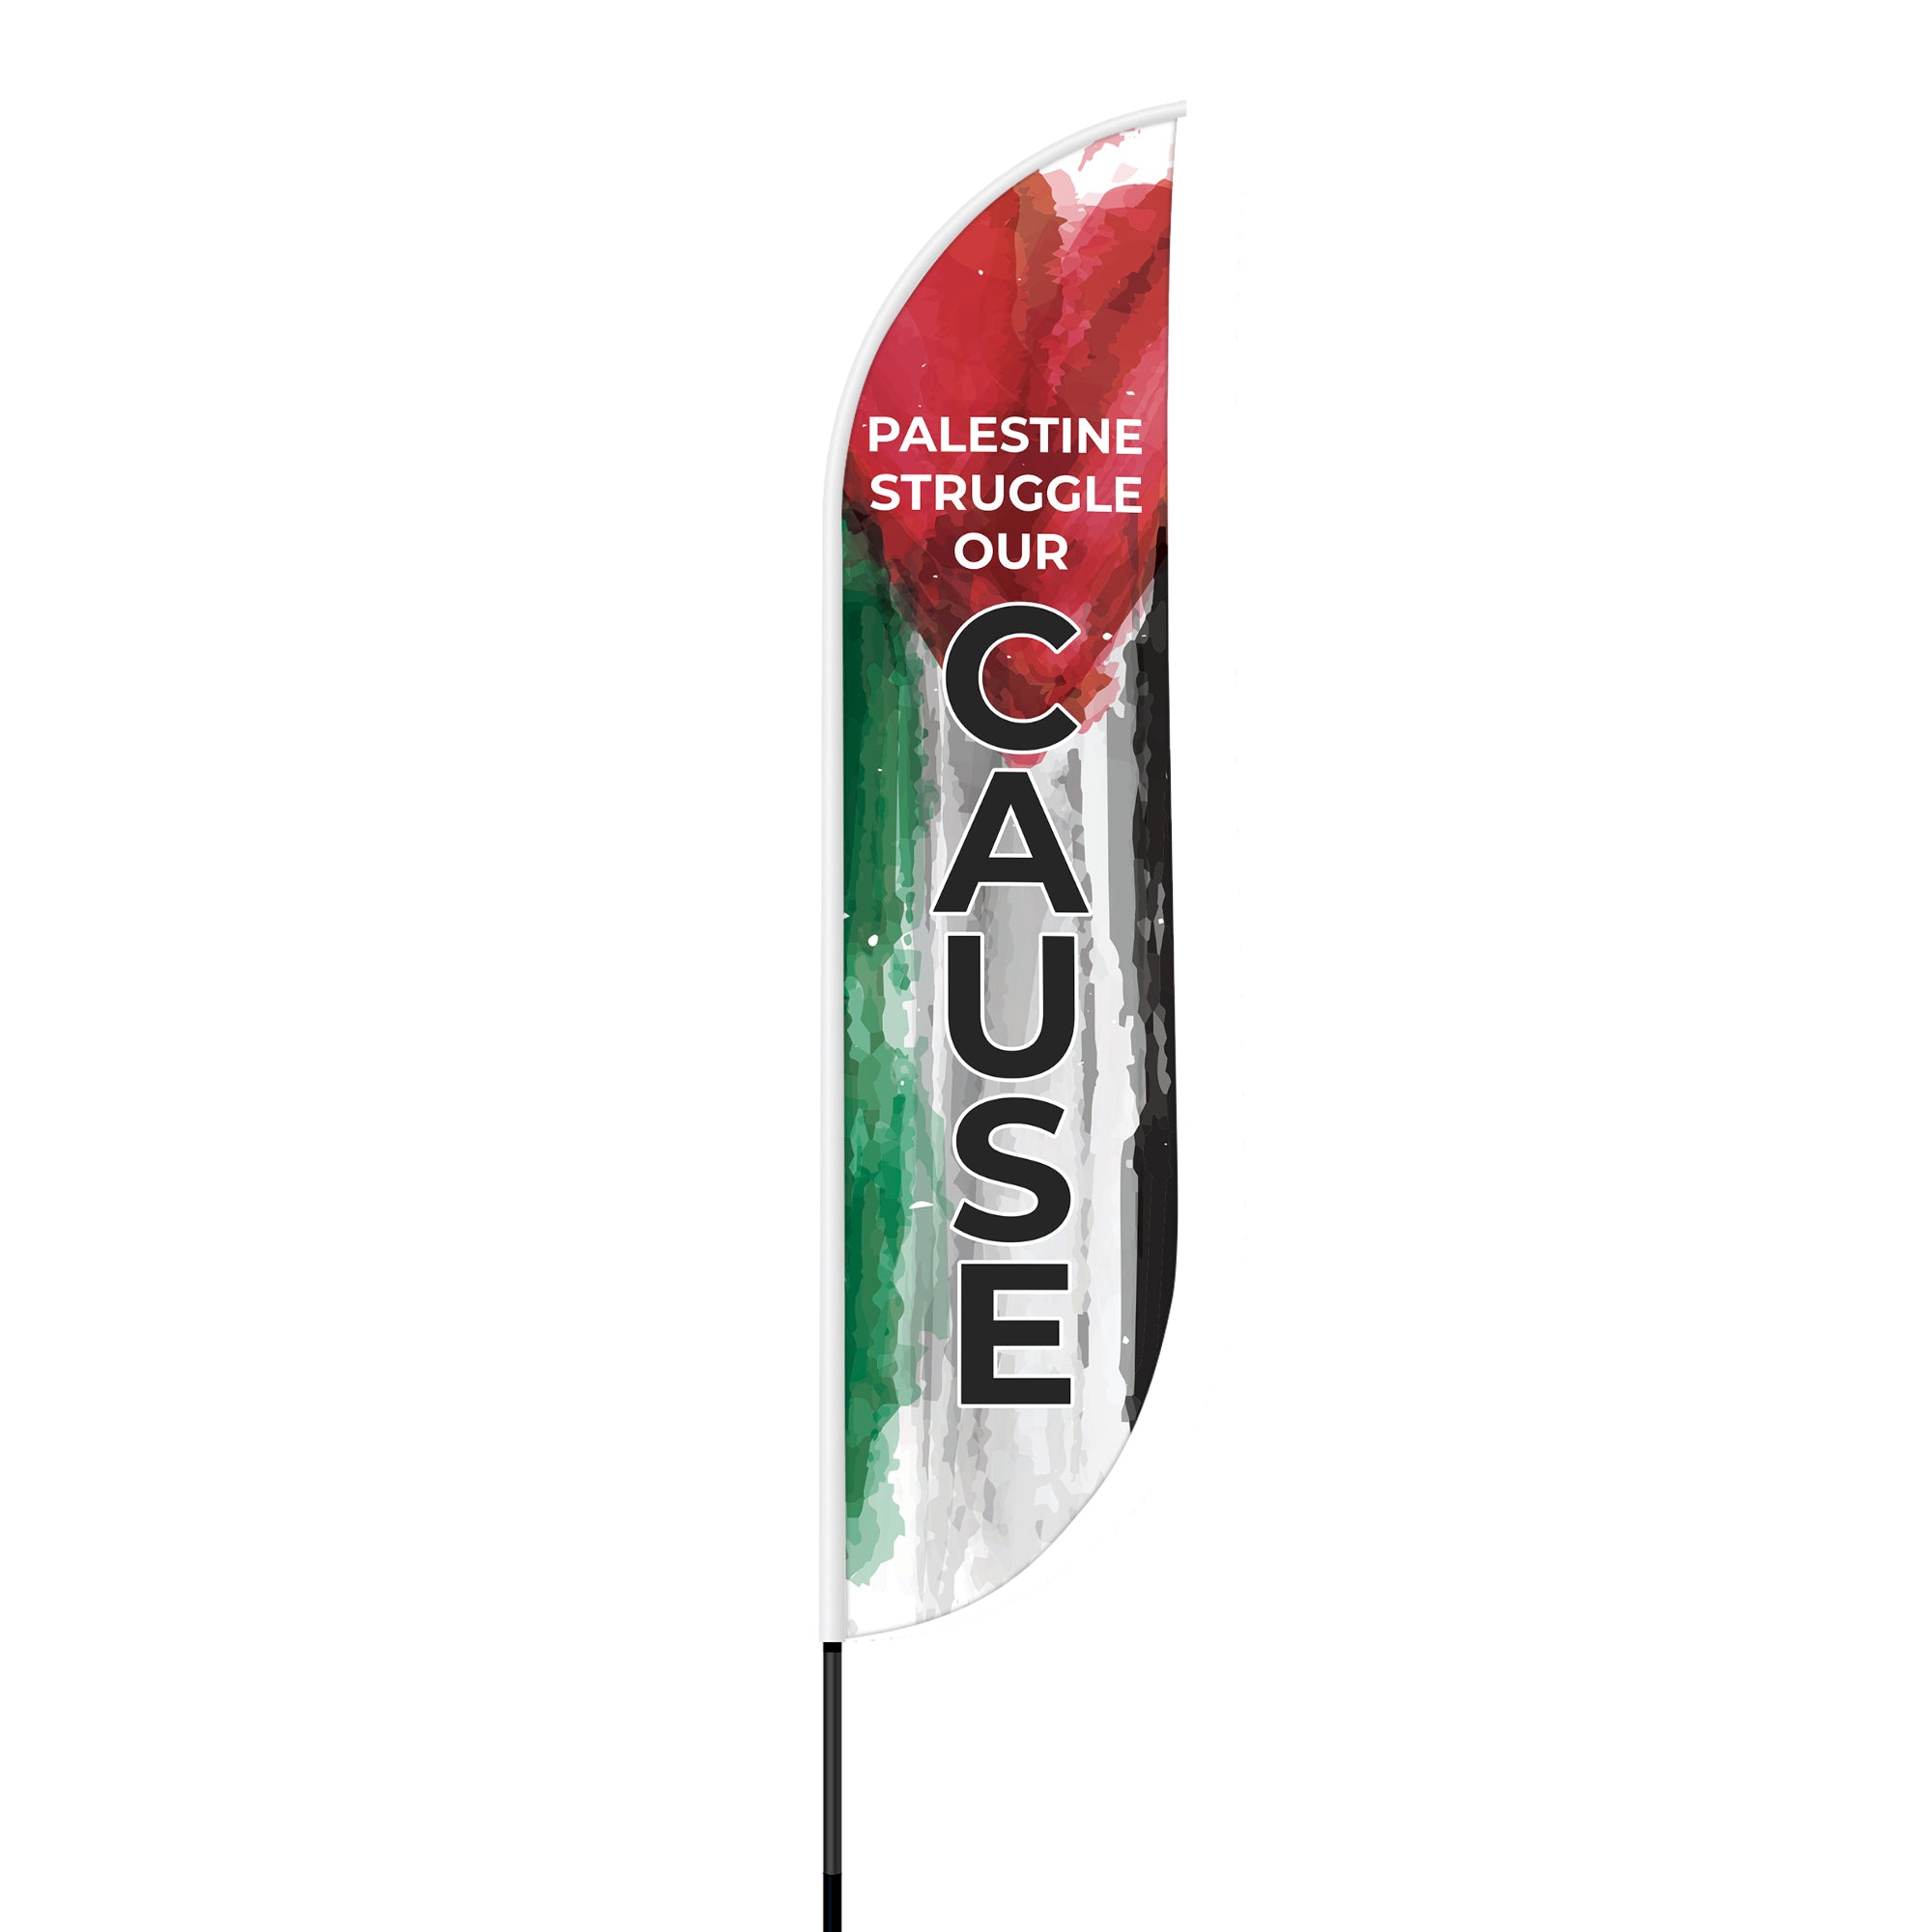 'Palestine's Struggle, Our Cause' Feather Flag – Unite with Premium Quality and Versatility